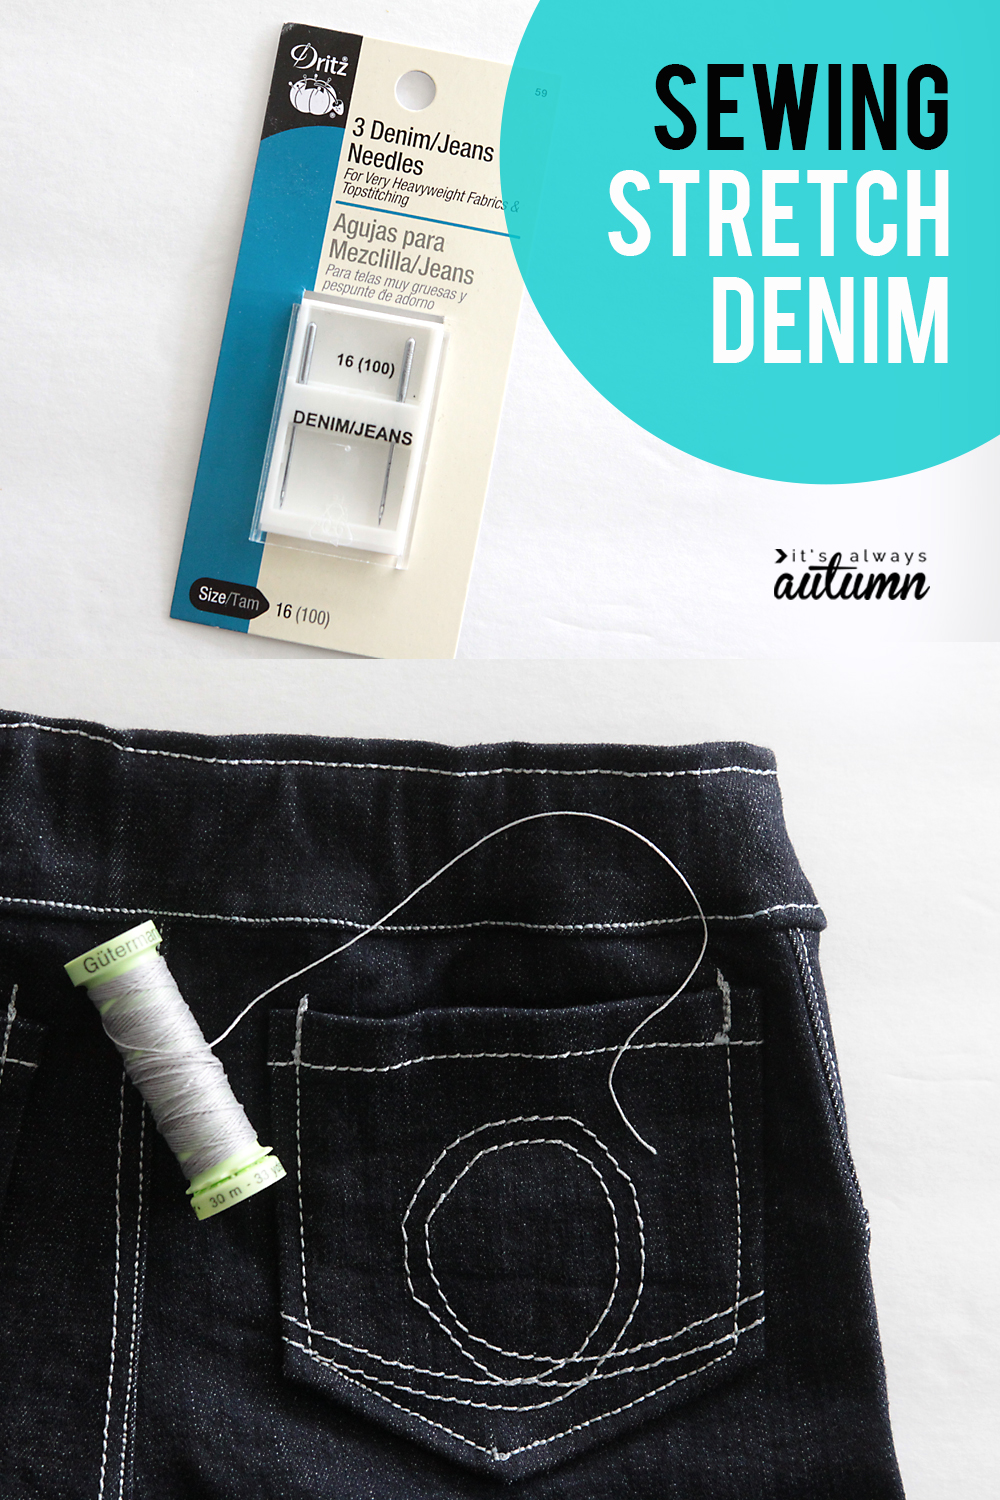 Jeans Sewn with a 3-Thread Overlock and Chain Stitch - WeAllSew